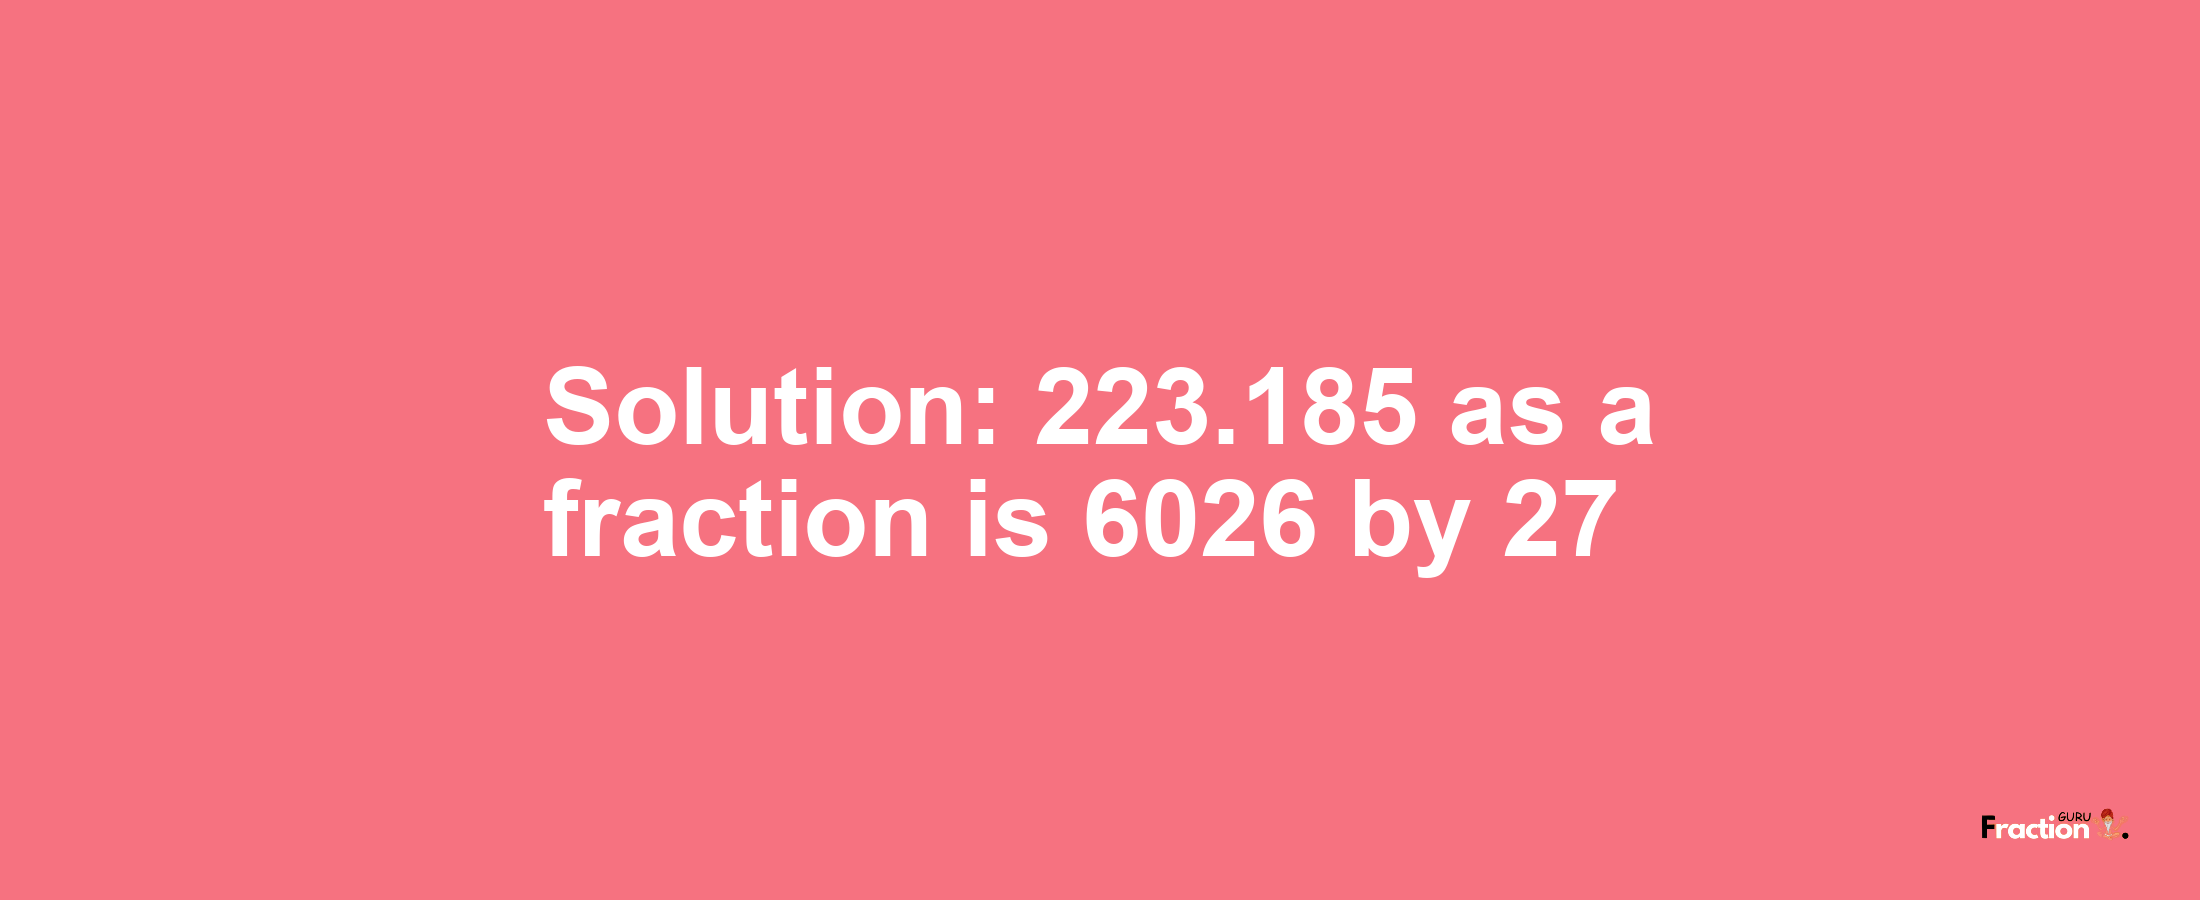 Solution:223.185 as a fraction is 6026/27